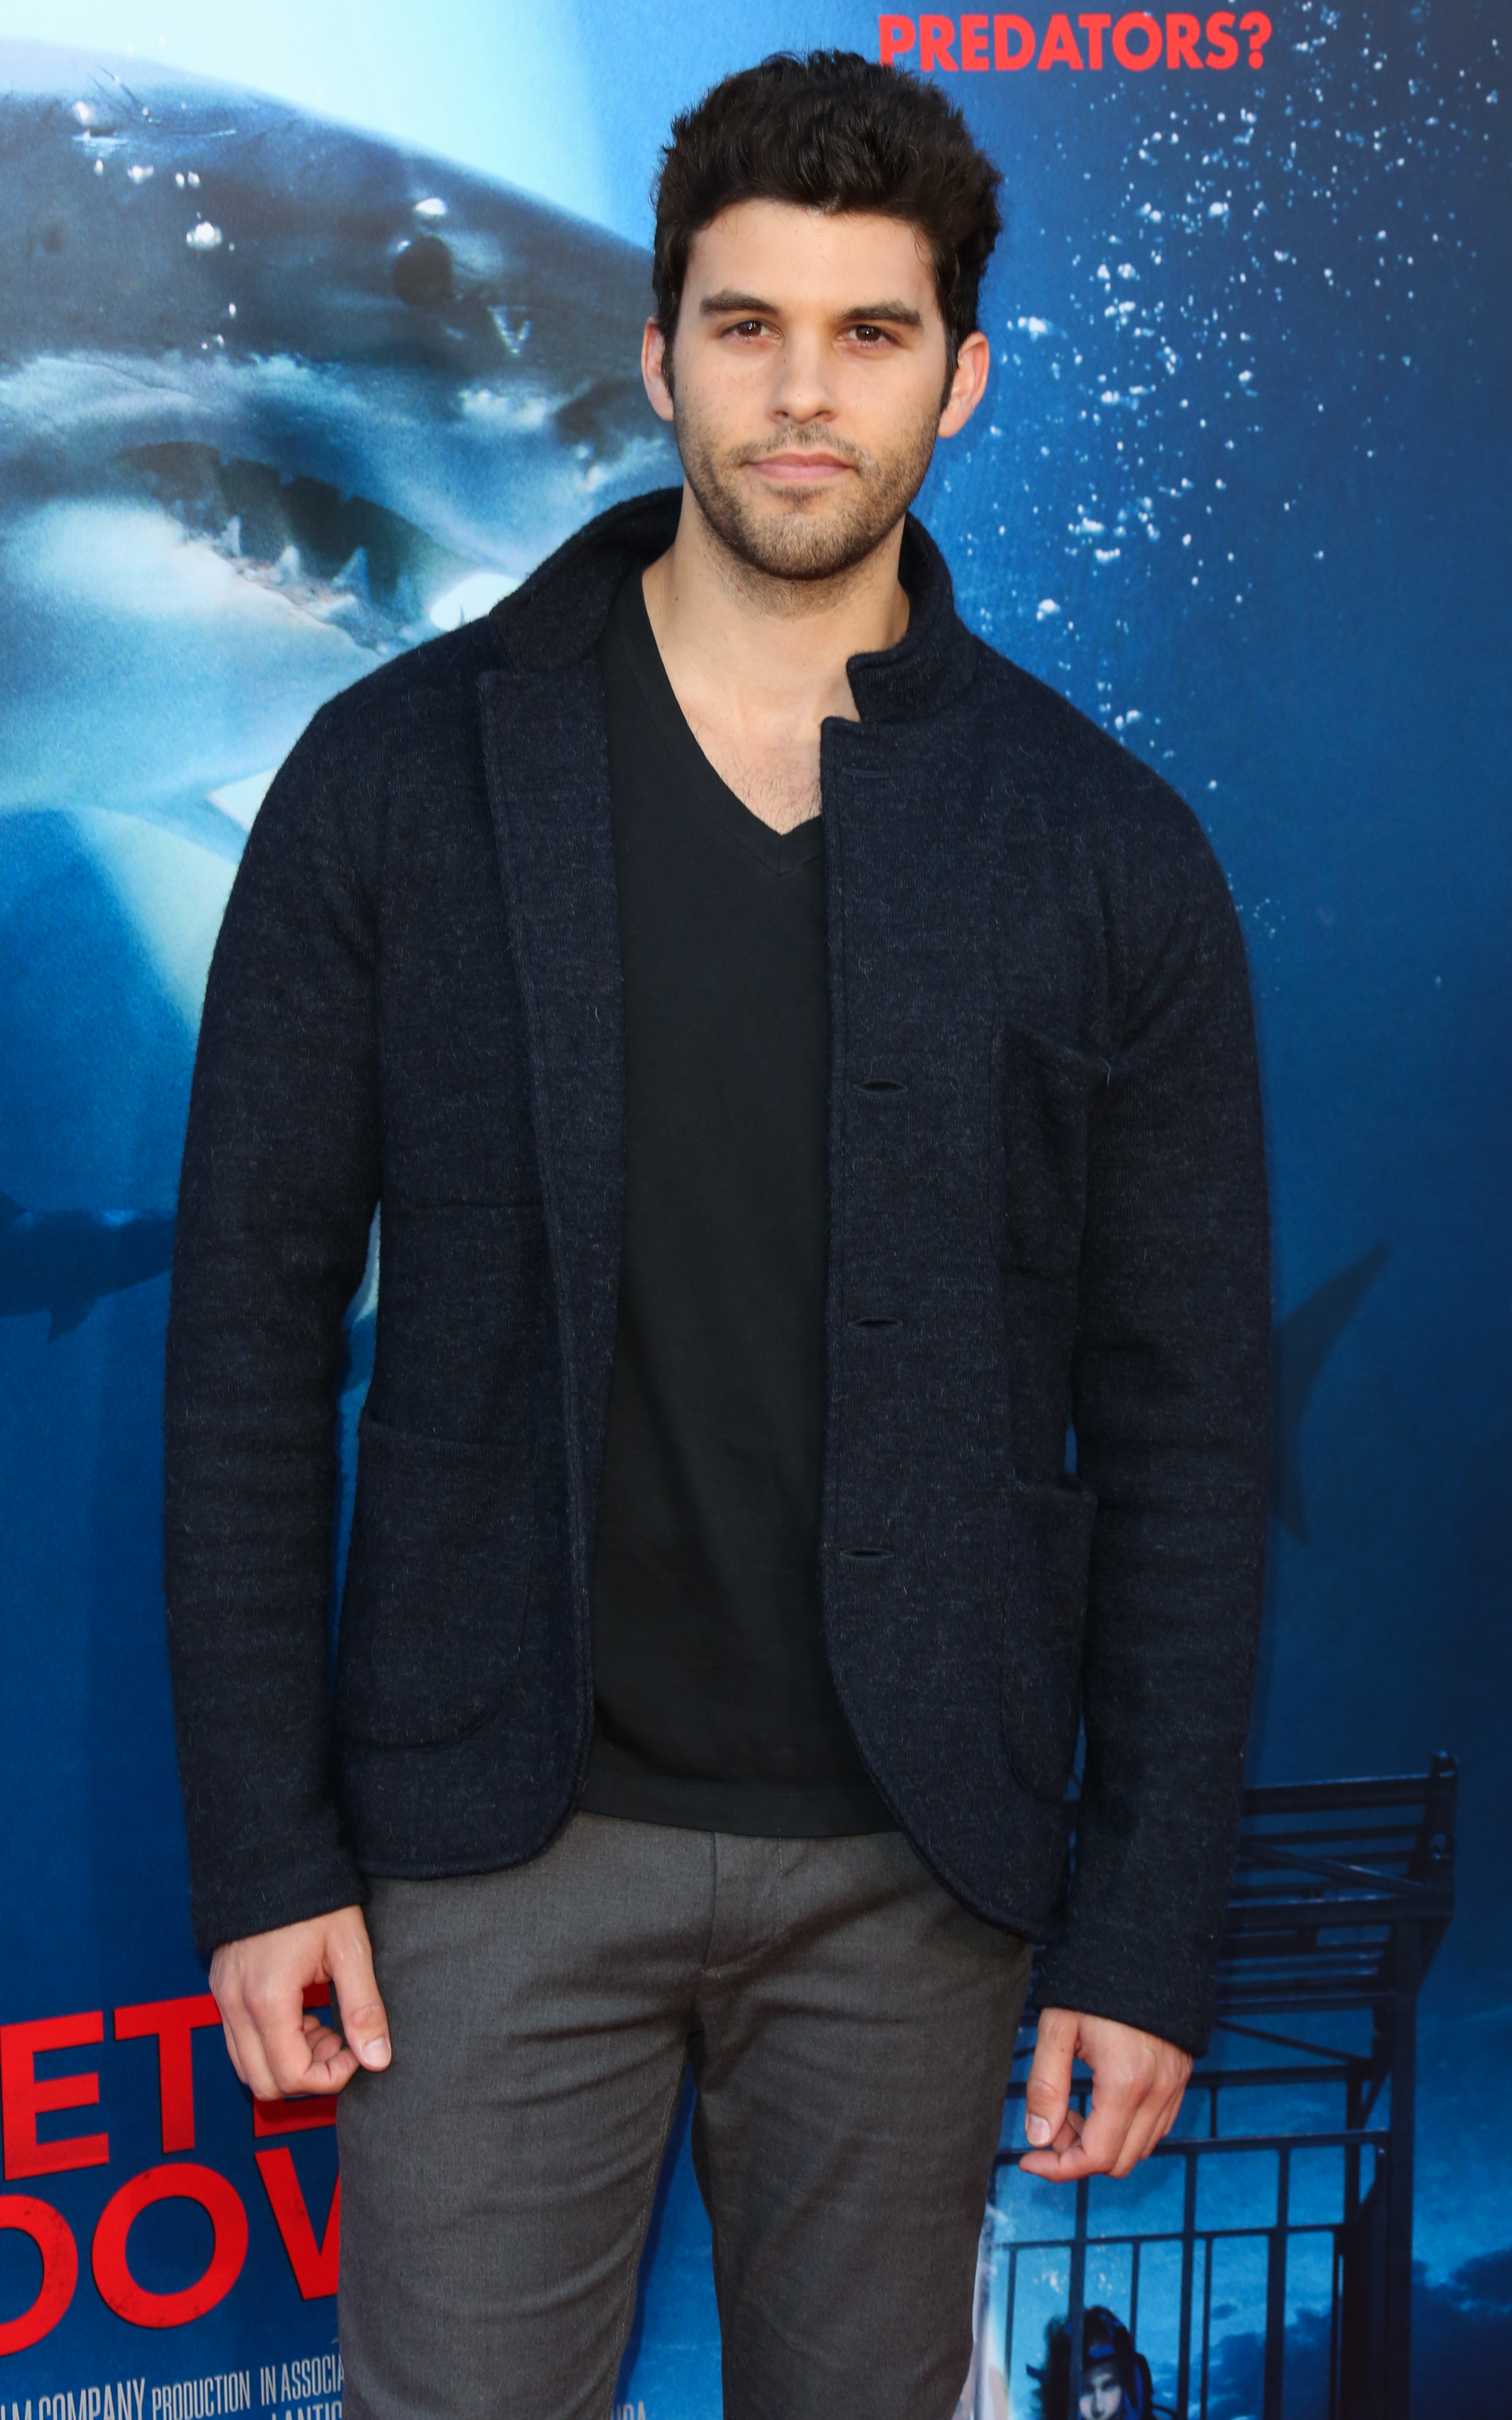 Steven Krueger attends the premiere of "47 Meters Down" at The Regency Village Theatre on June 12, 2017, in Westwood, California. | Source: Getty Images